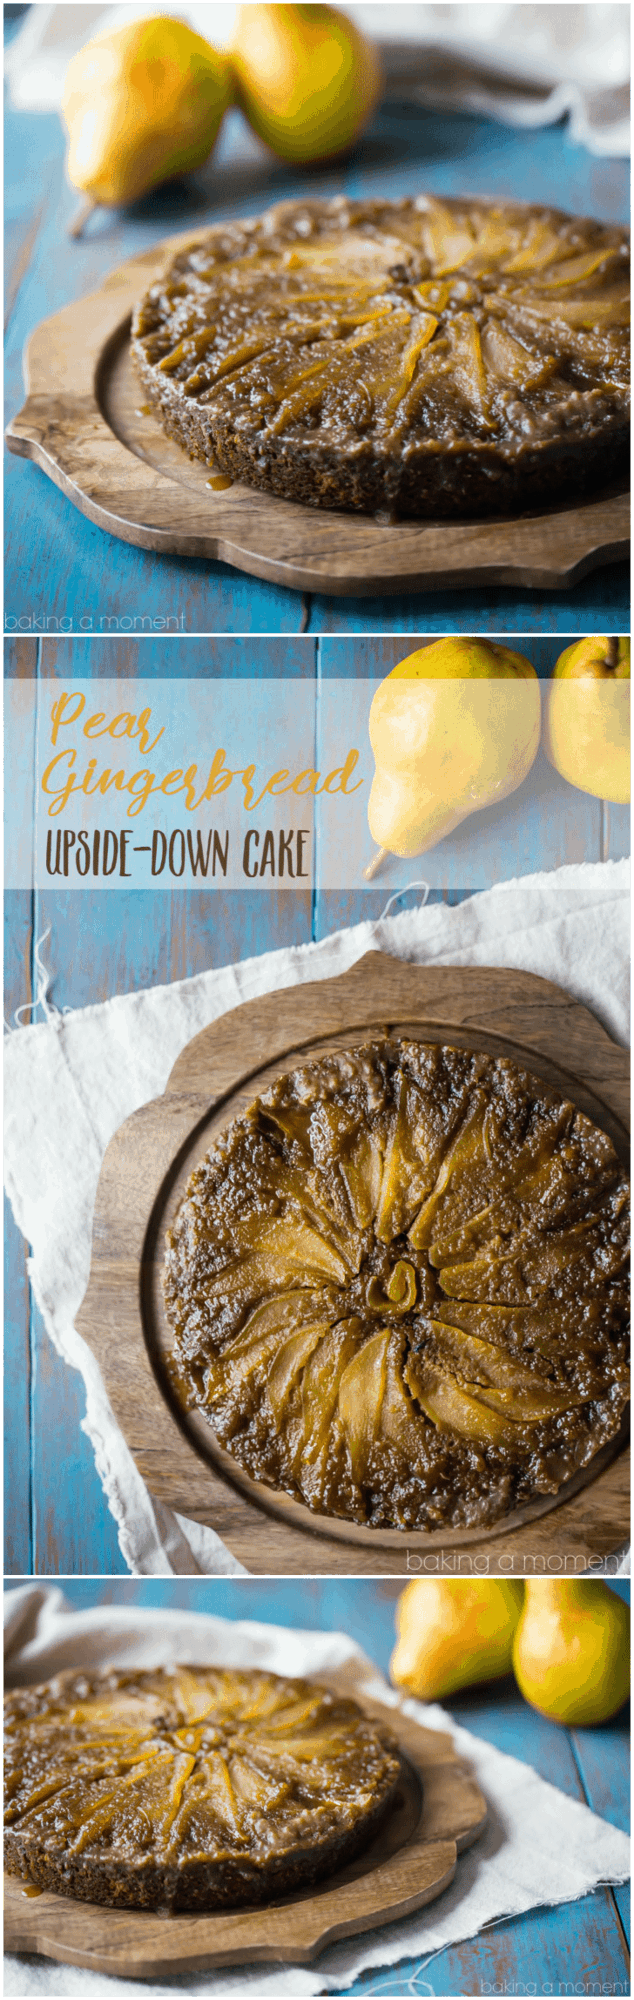 Pear Gingerbread Upside Down Cake- oh my! So many gorgeous flavors going on here. I really loved the way the sweet, brown-sugary pears balanced out the spiciness of the gingerbread. A winner of a winter dessert, for sure! food desserts cake #ad @southernliving